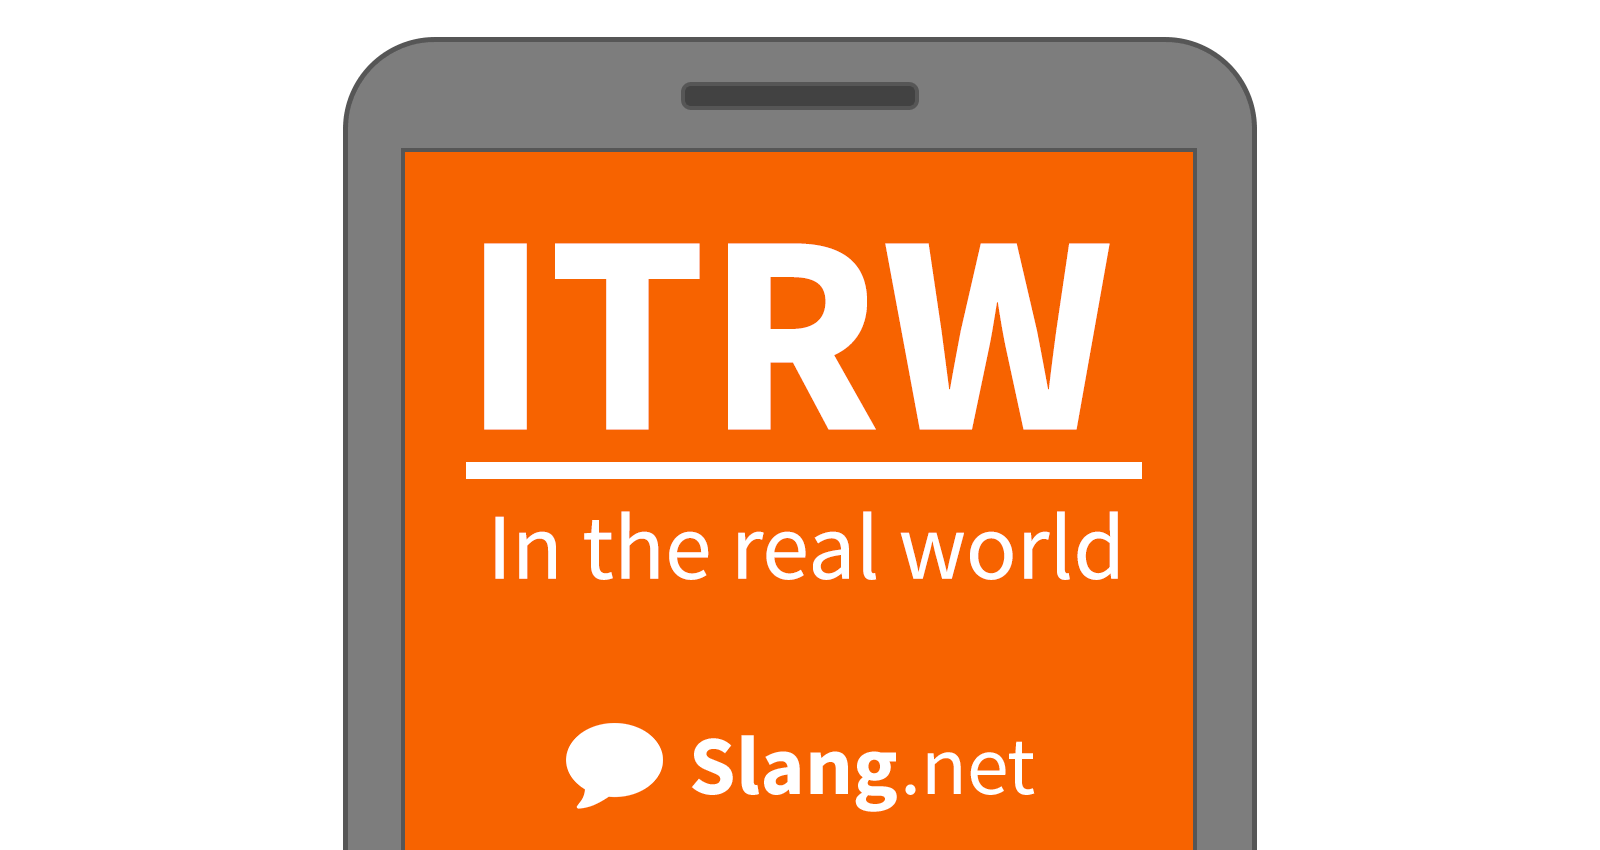 People often use ITRW online, including when gaming